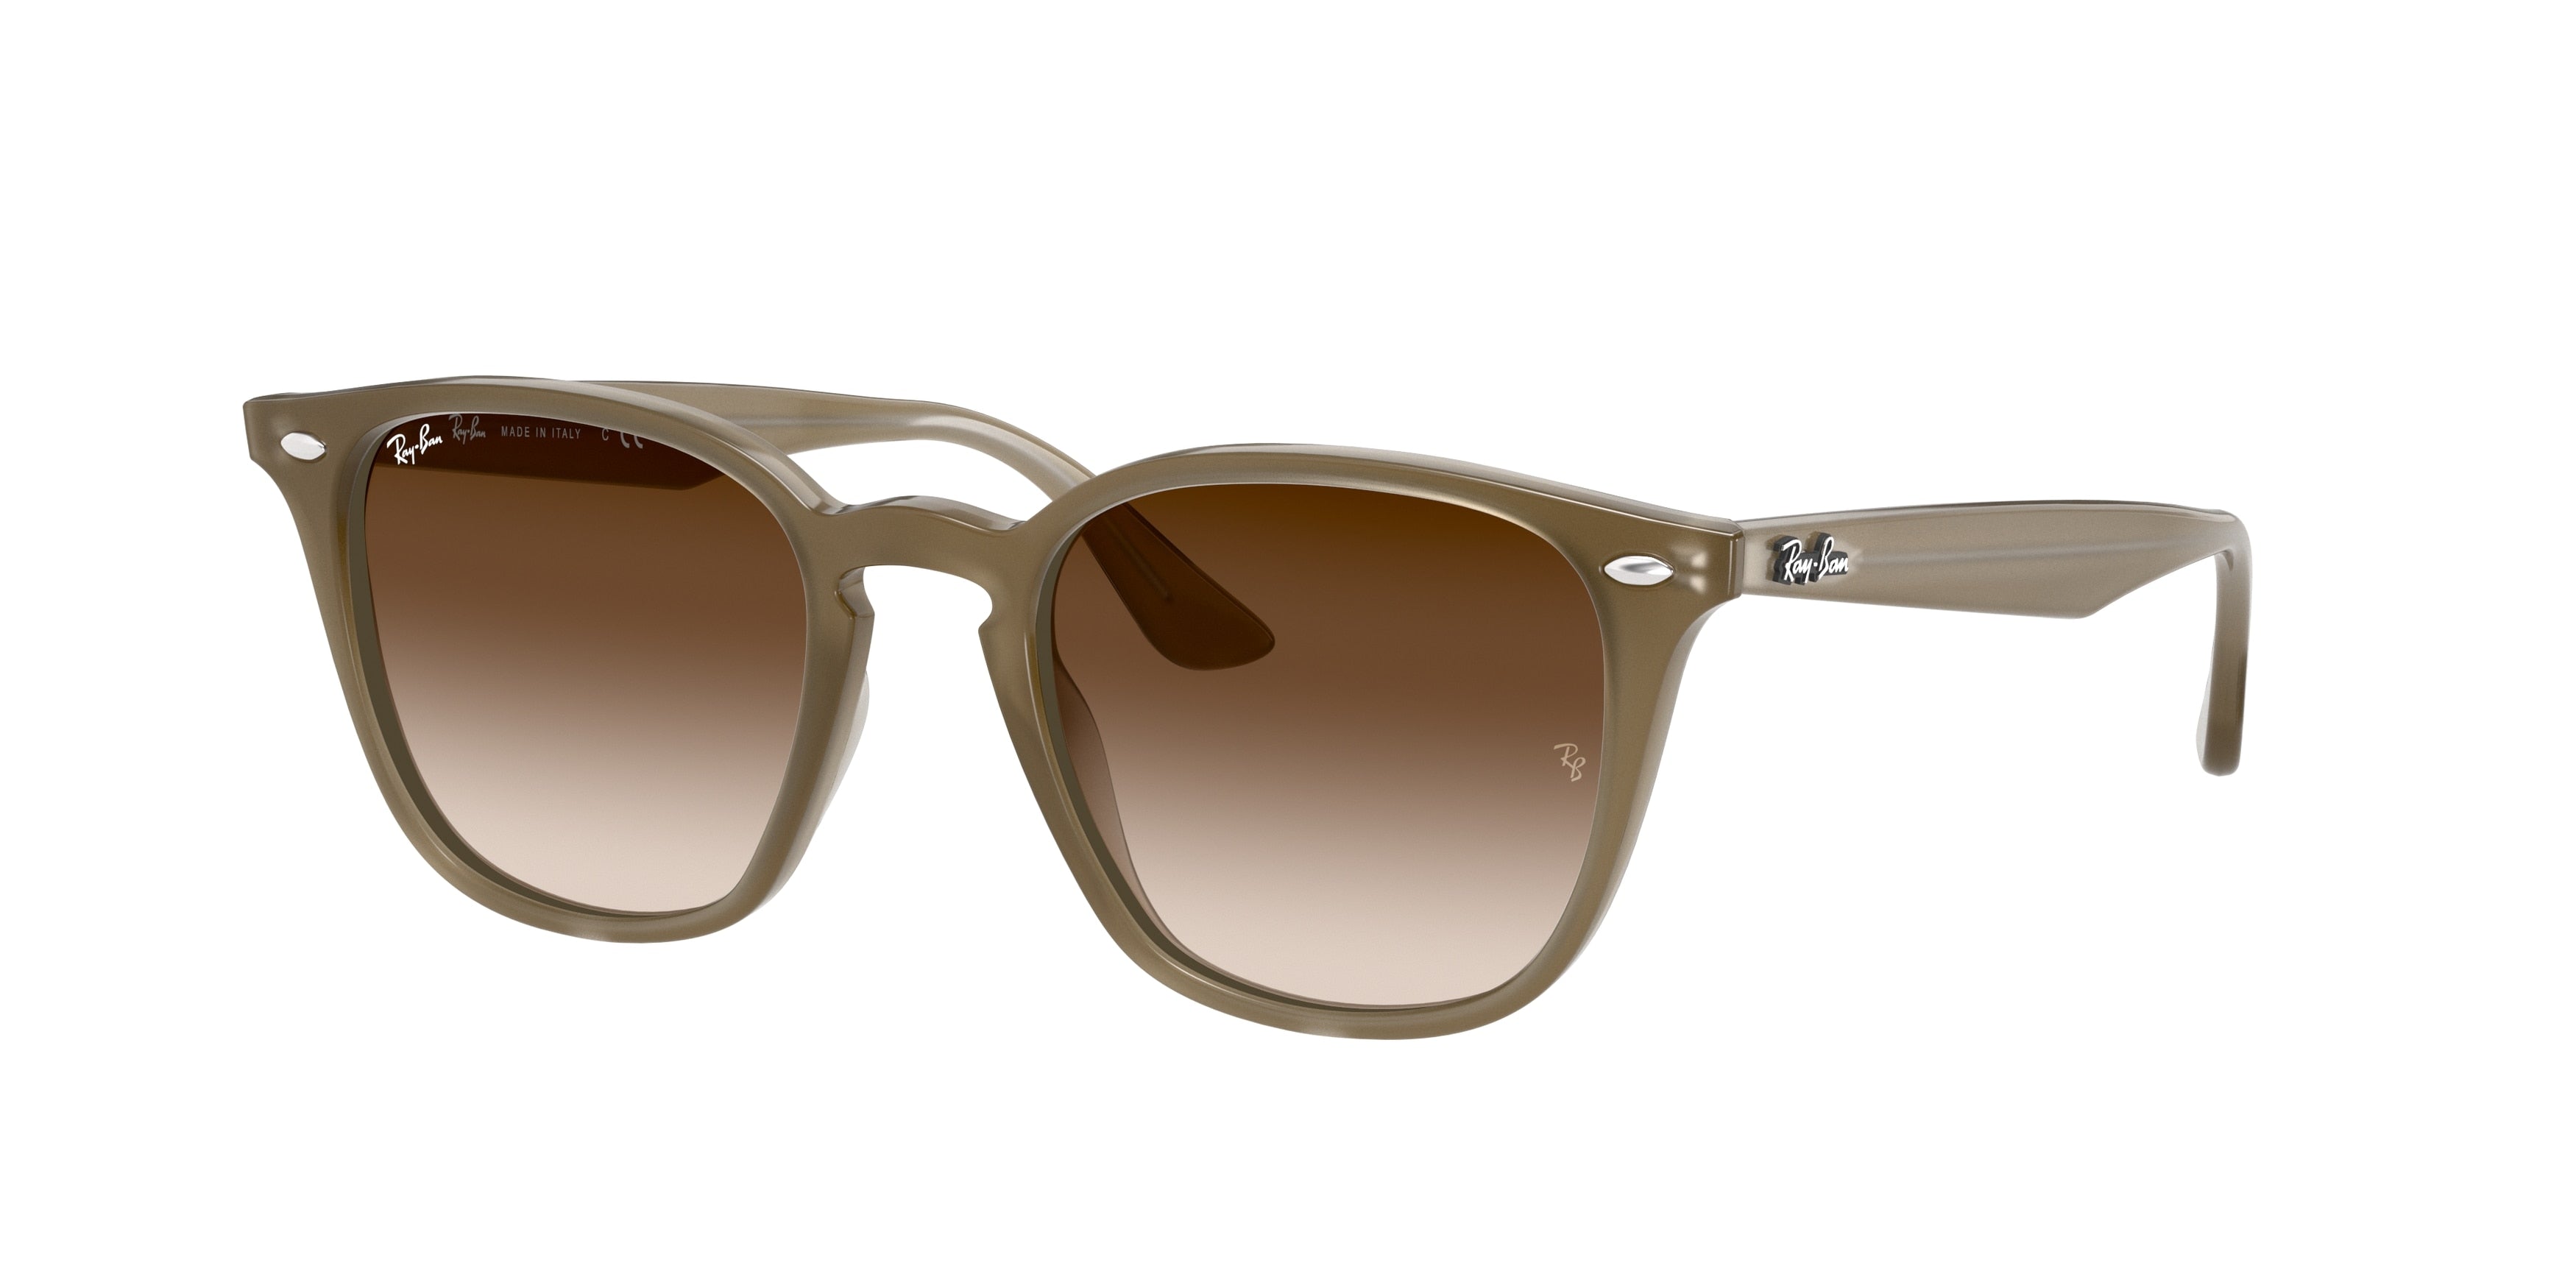 Ray-Ban RB4258F Square Sunglasses  616613-Beige 52-150-20 - Color Map Beige